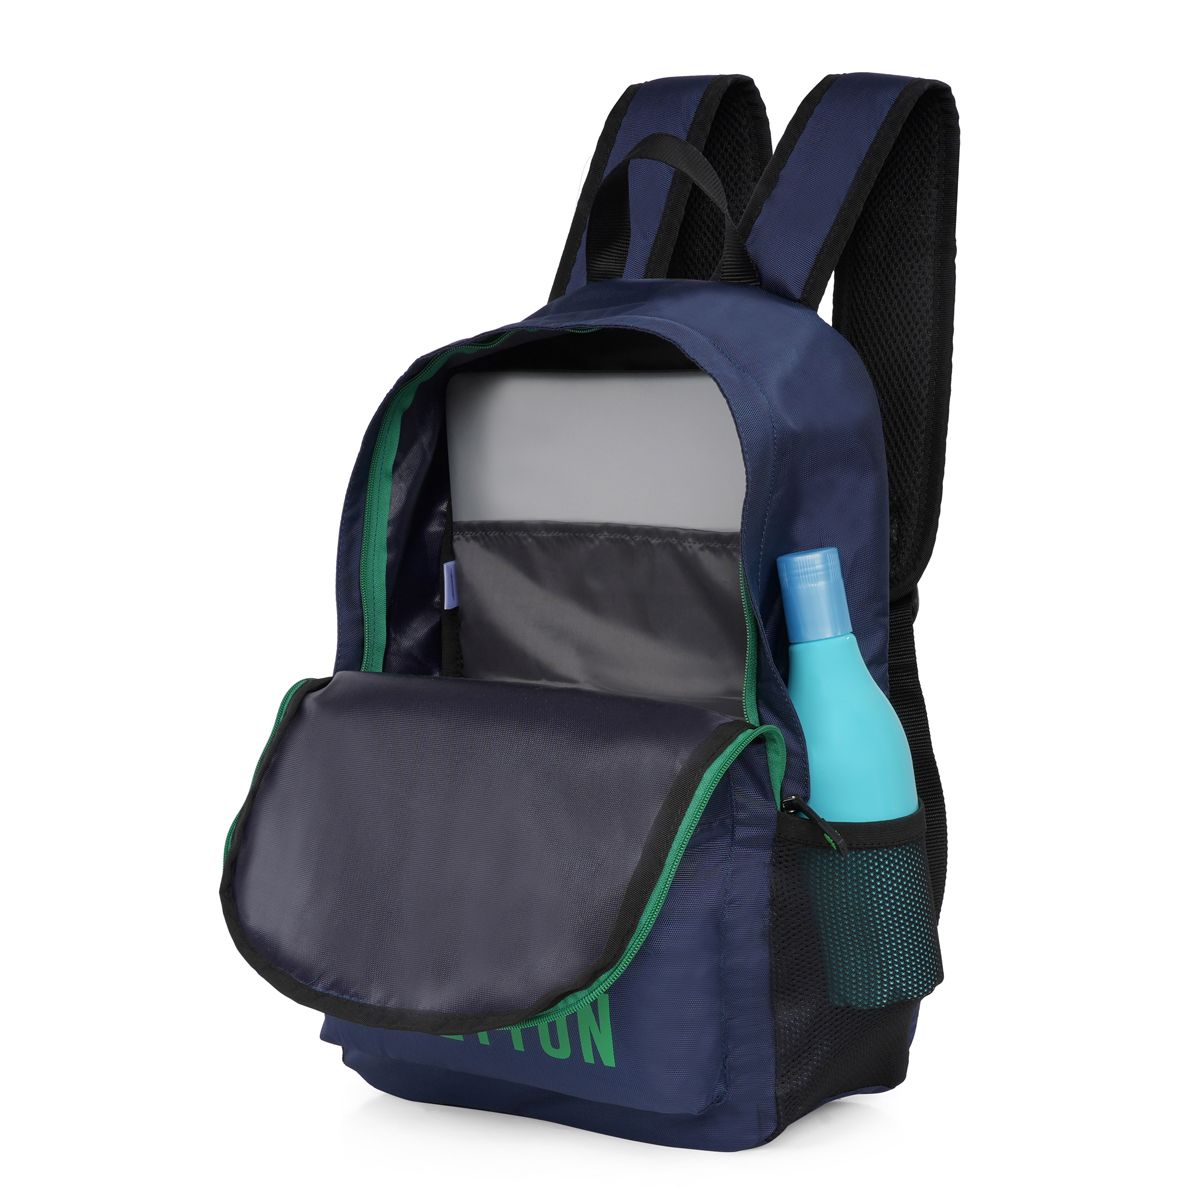 United Colors of Benetton Willow Laptop Backpack navy